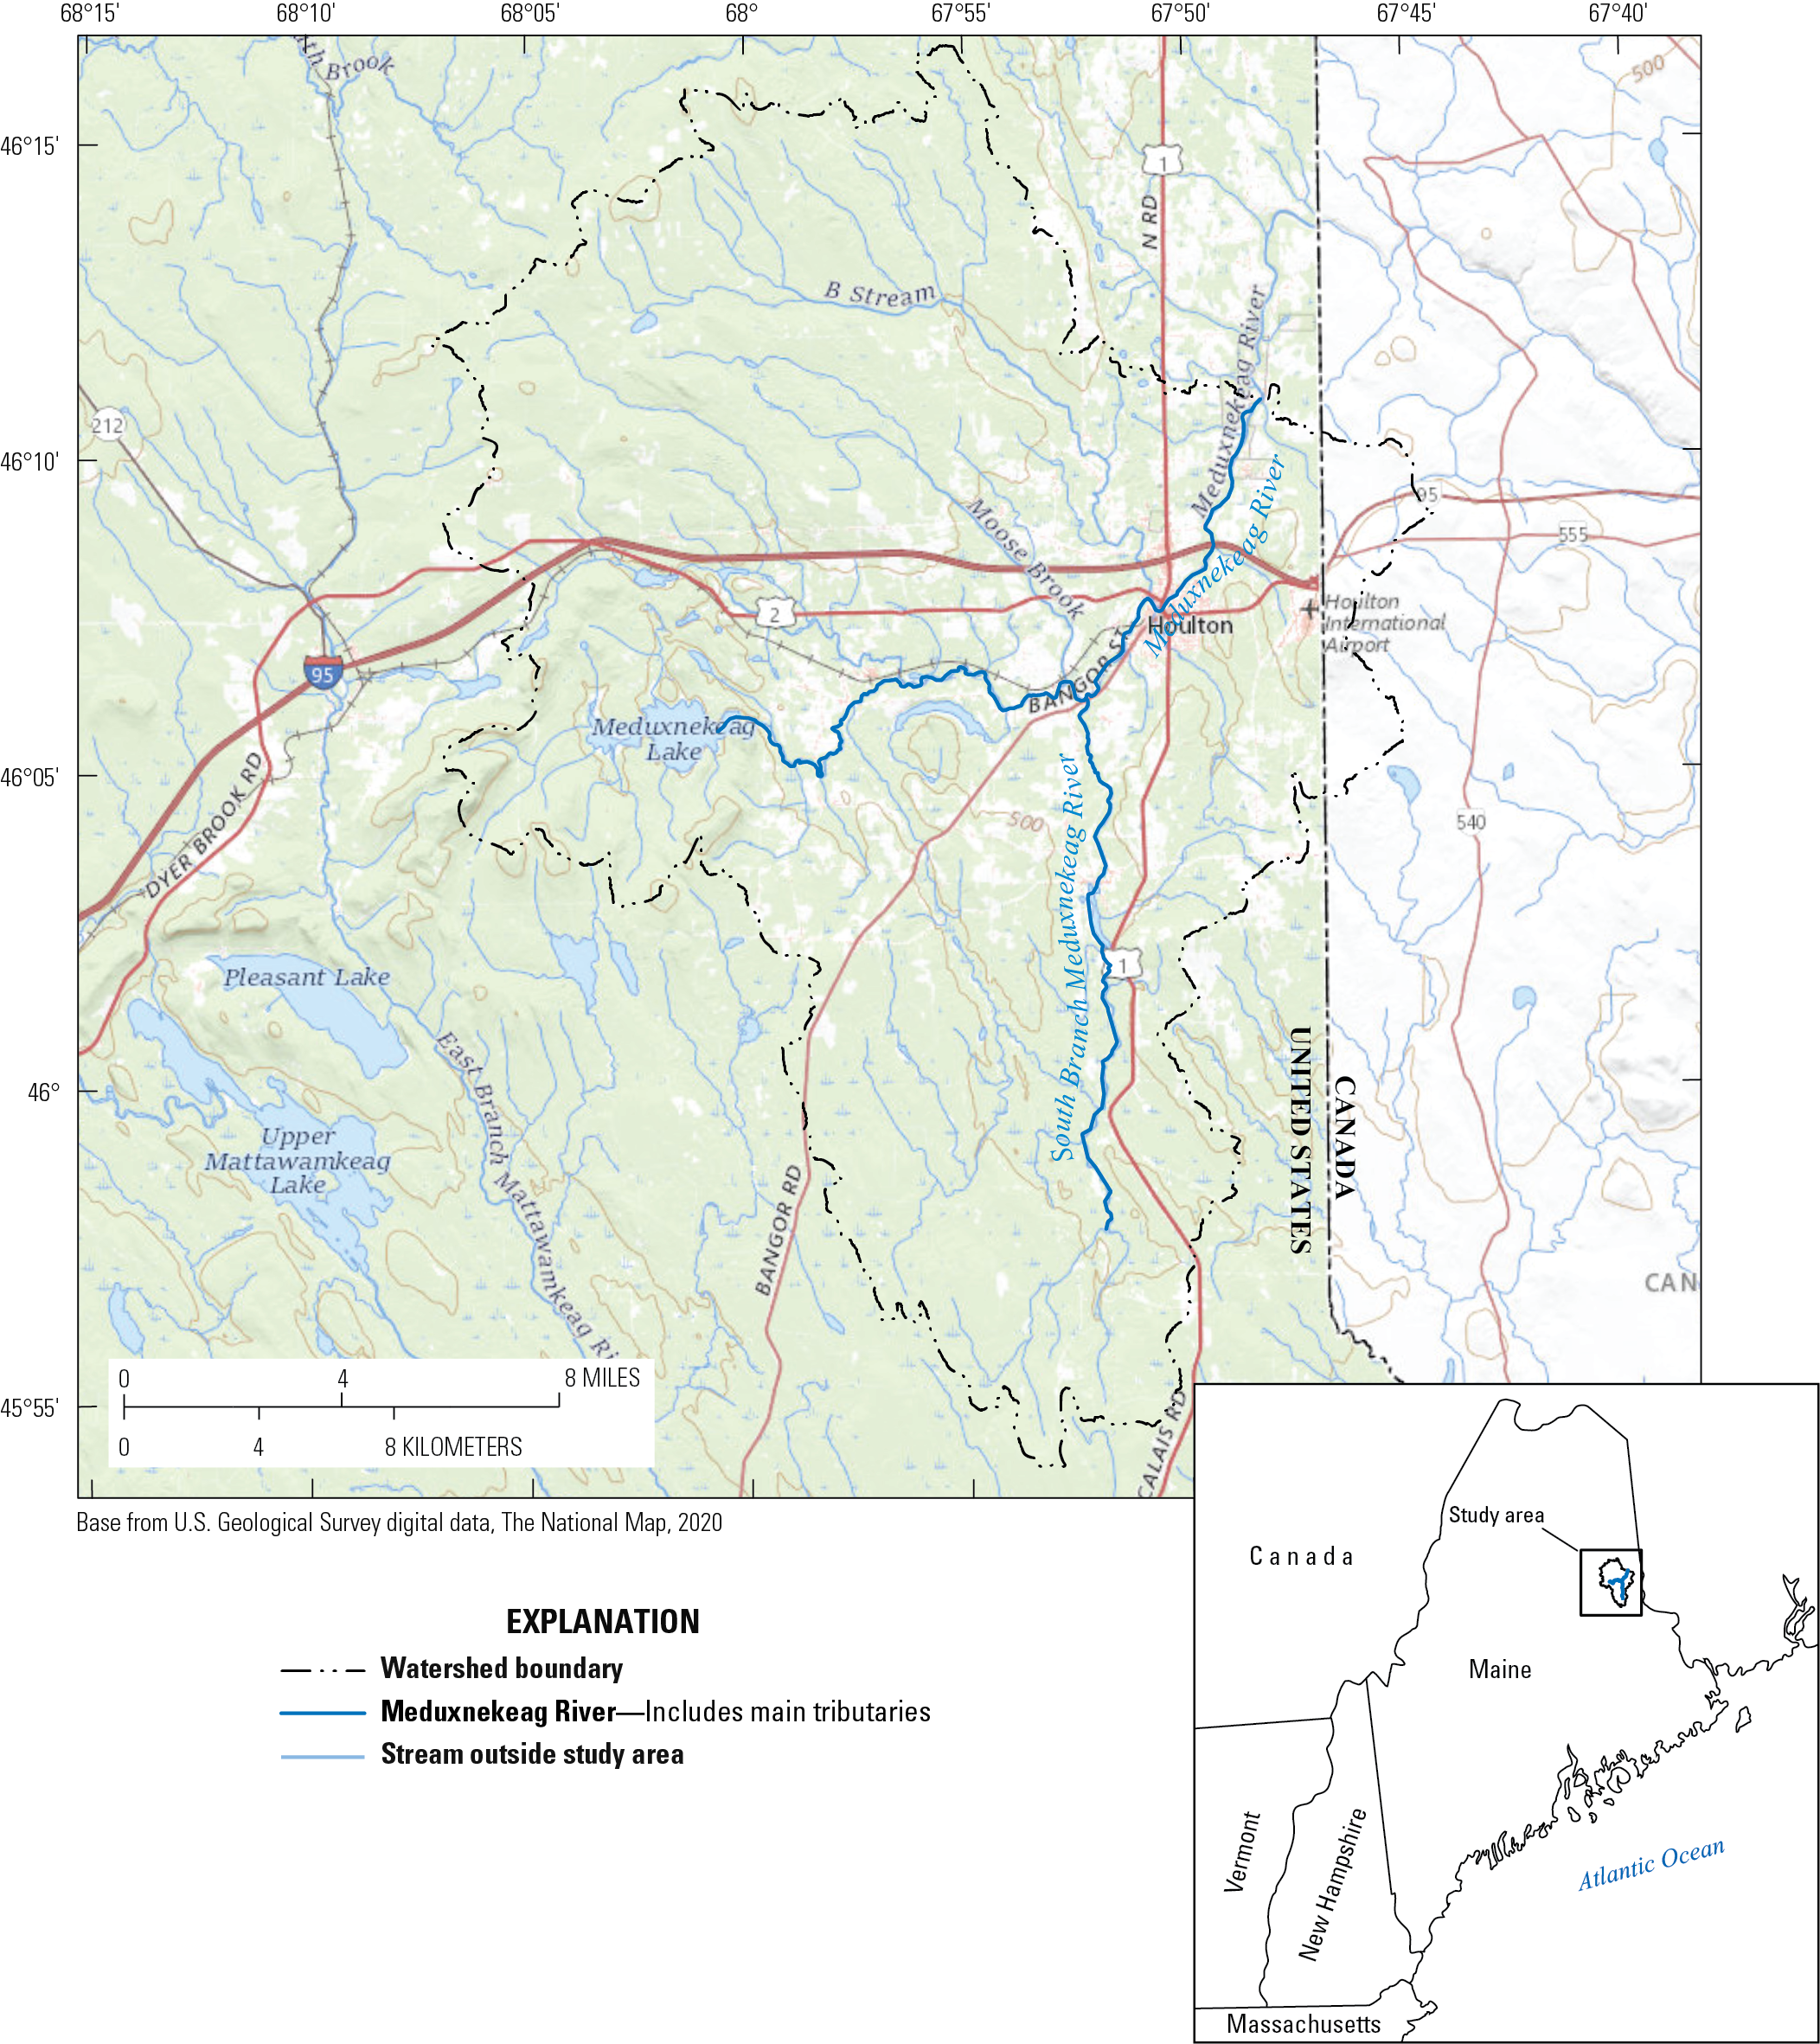 Outline of the Meduxnekeag River watershed in Maine.